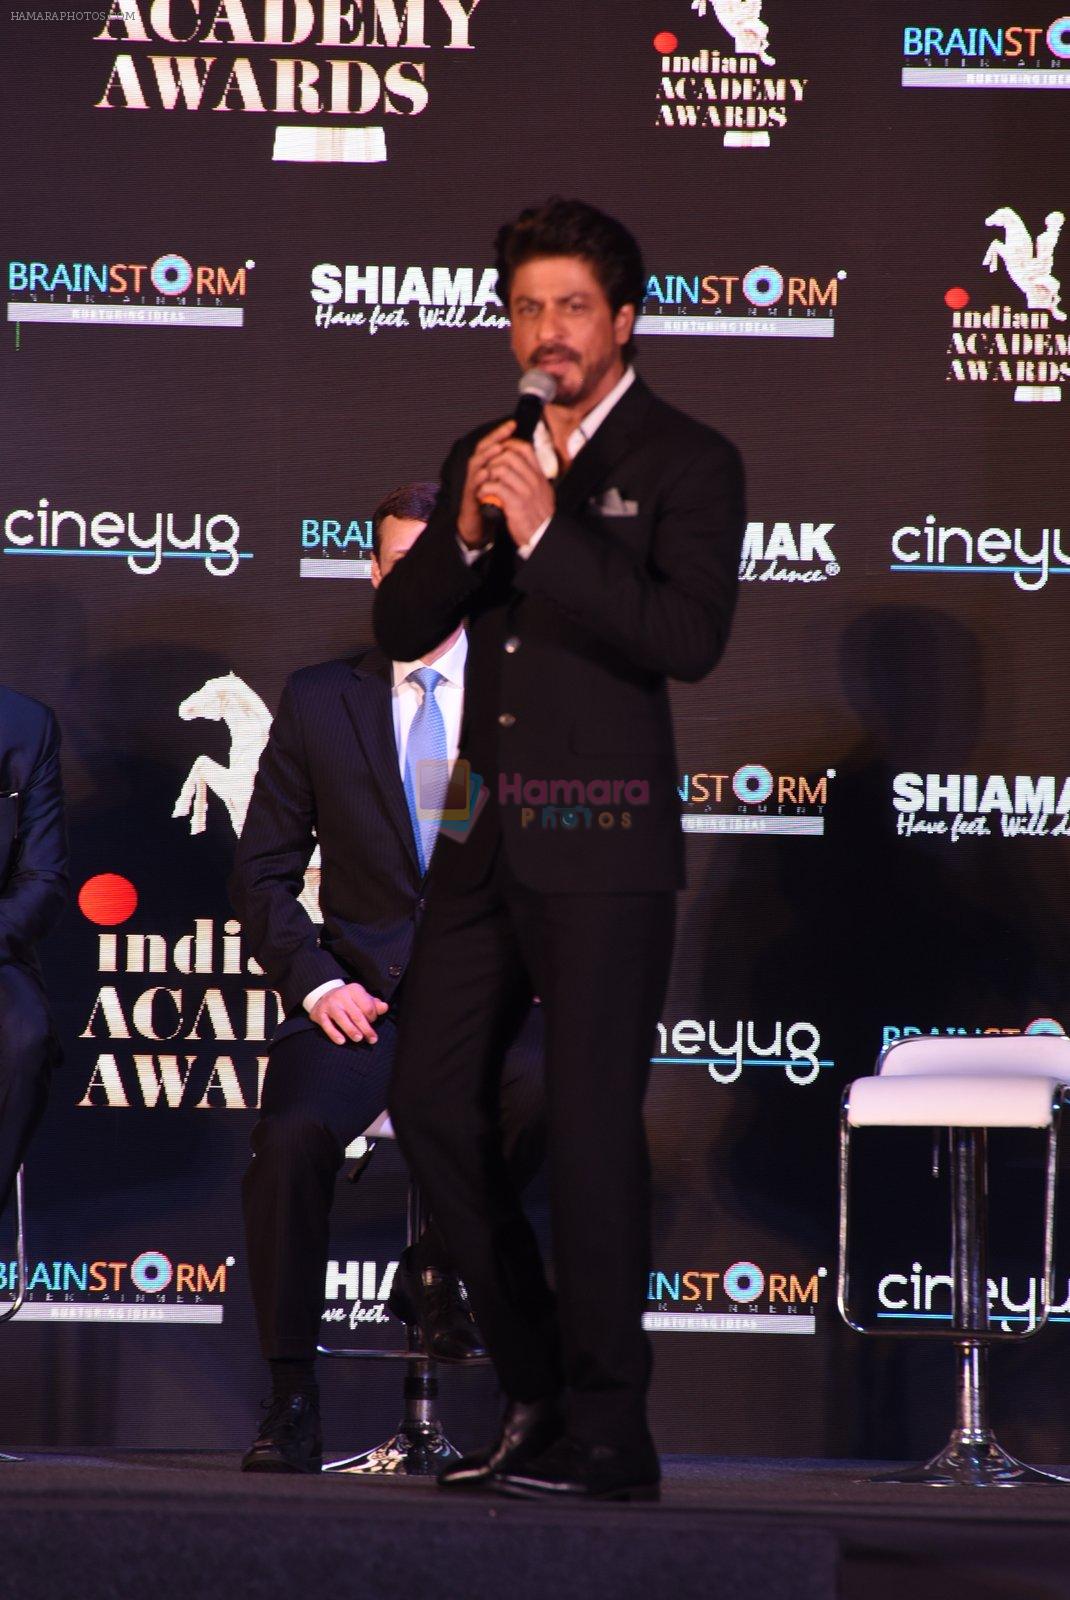 Shah Rukh Khan at a press meet to announce Indian Academy Awards on 21st Dec 2016